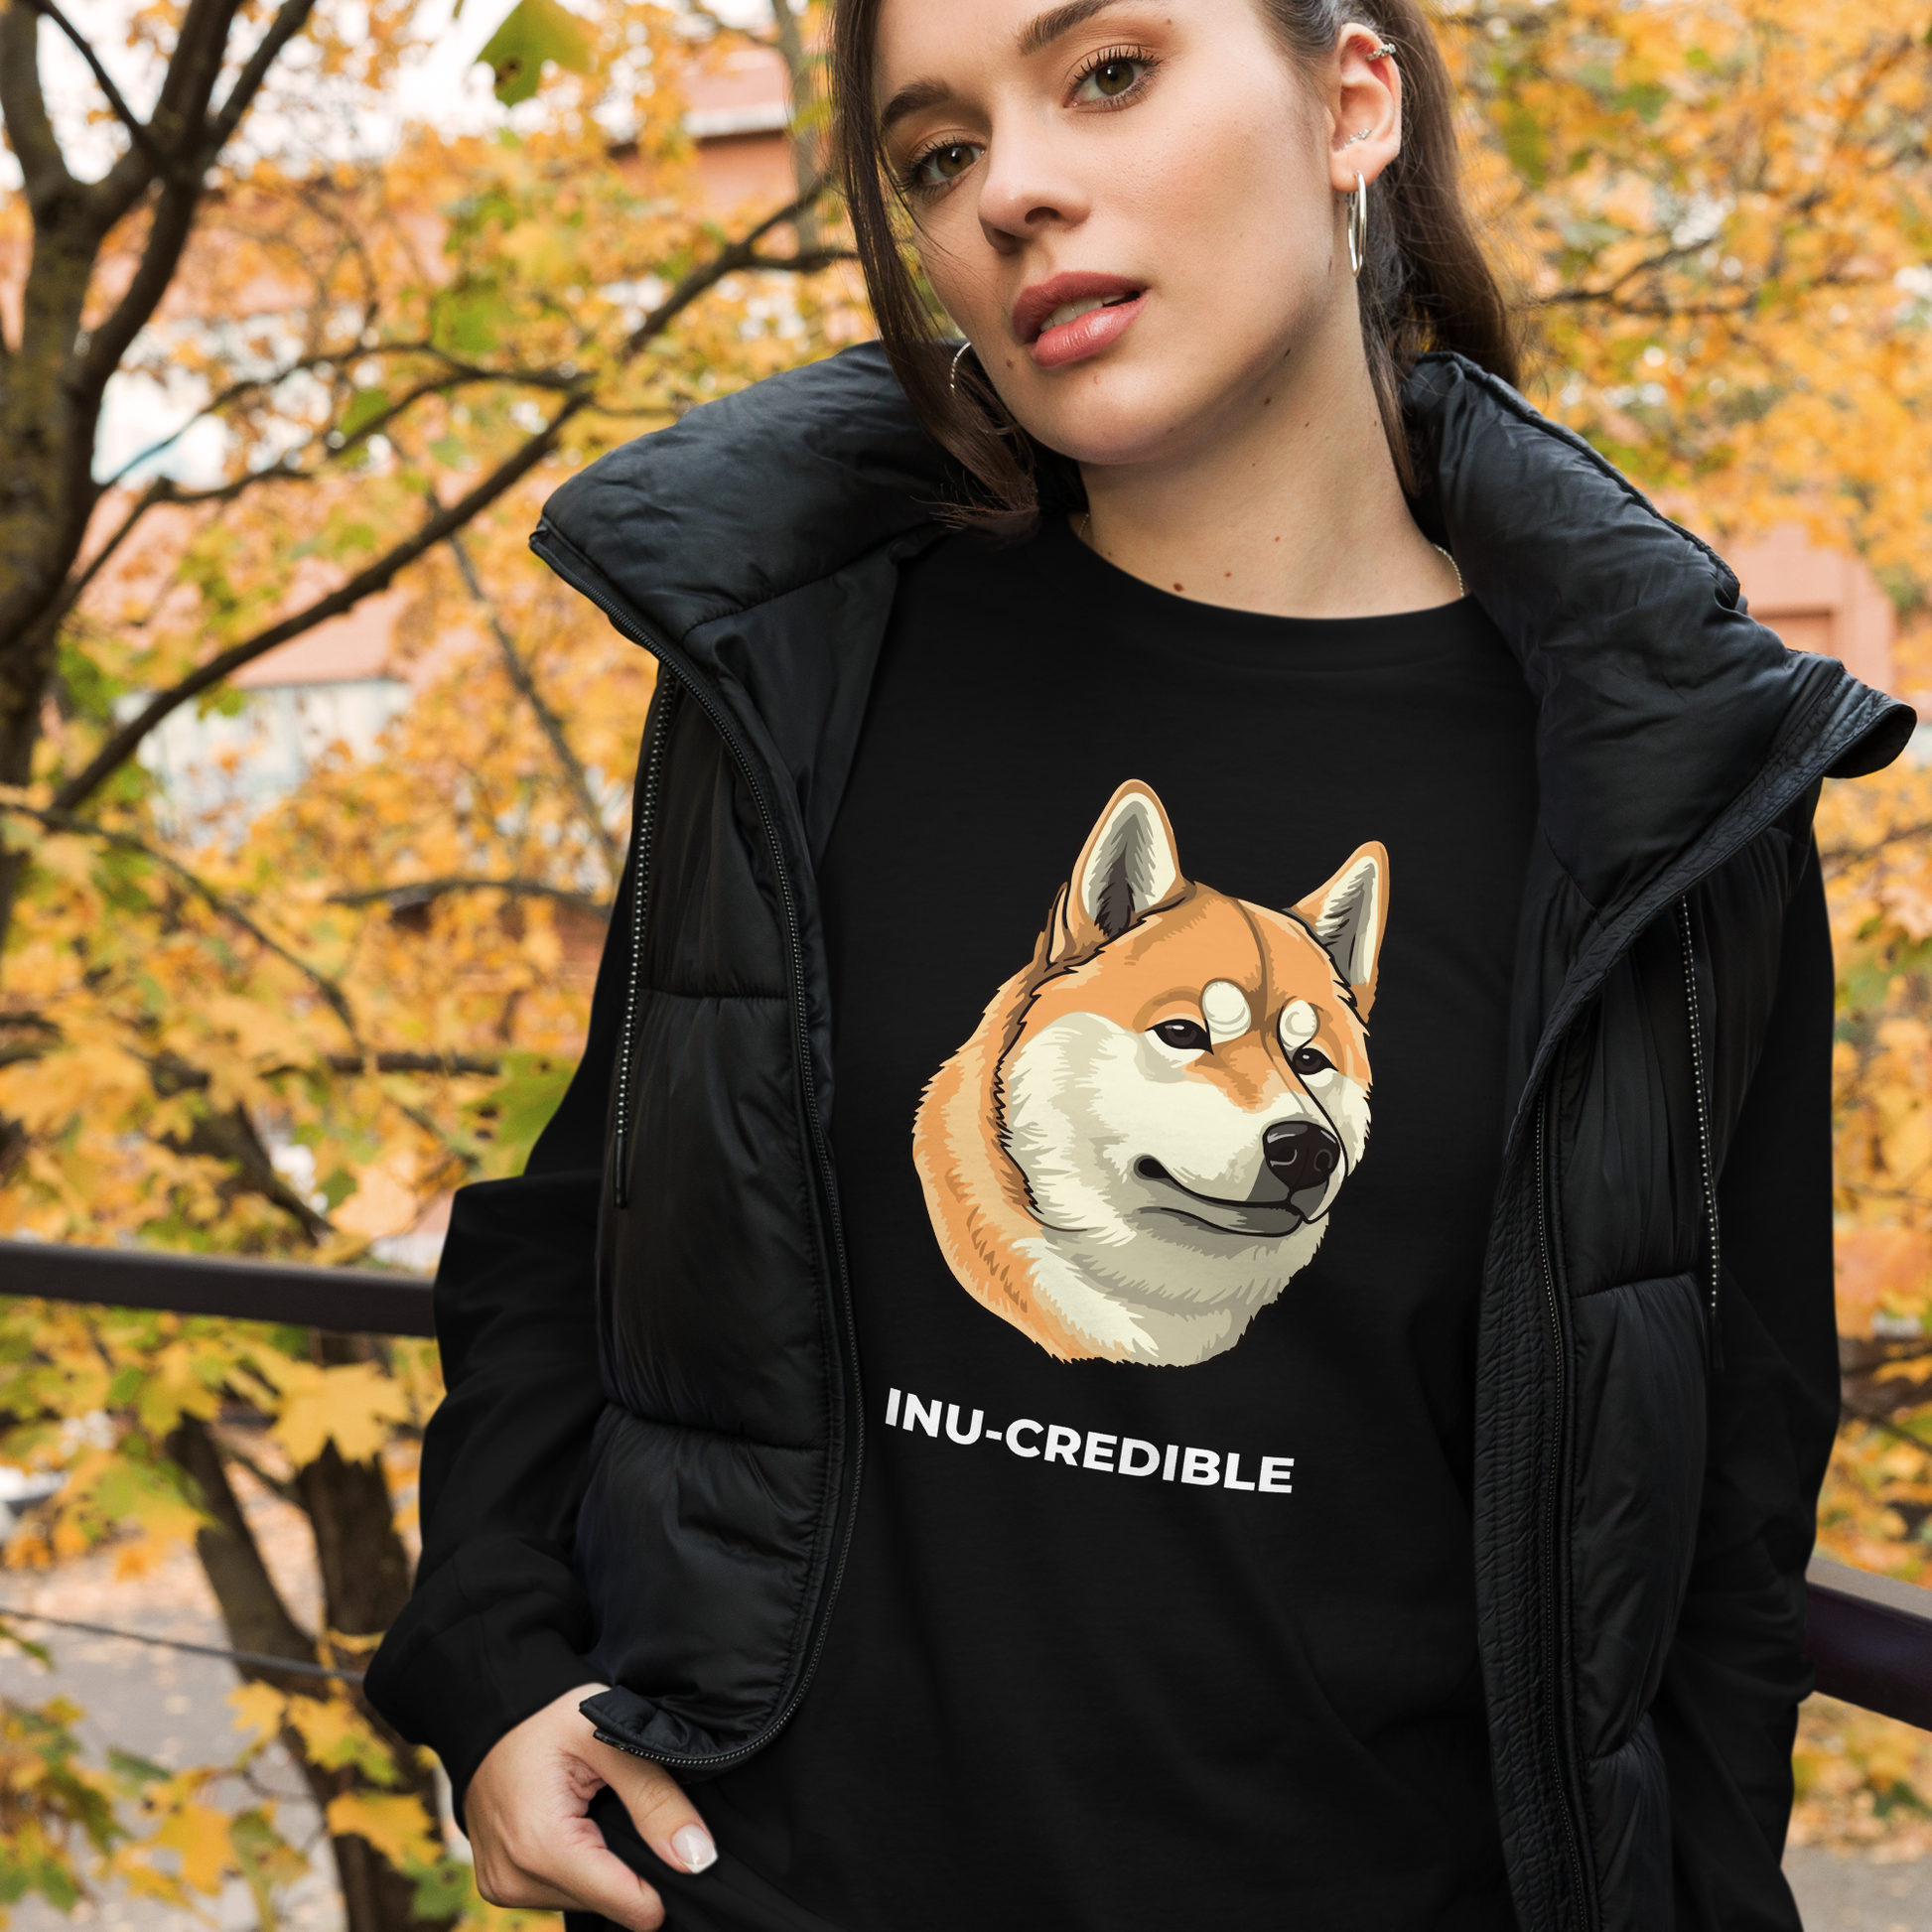 Woman wearing a Black Shiba Inu Long Sleeve Tee featuring the Inu-Credible graphic on the chest - Funny Shiba Inu Long Sleeve Graphic Tees - Boozy Fox